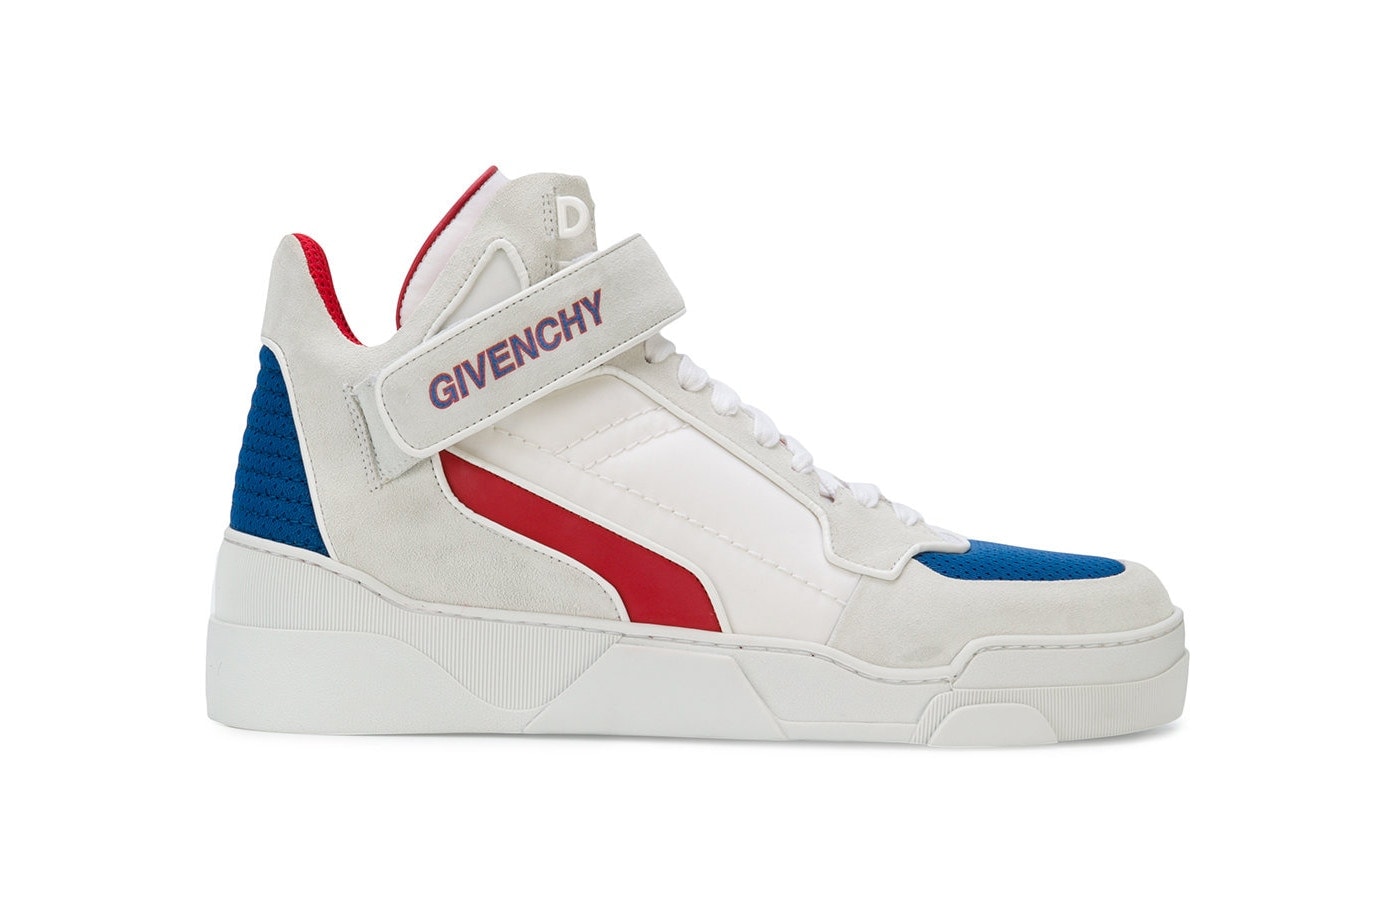 Givenchy 2018 春夏全新 Mid Sneakers 上架